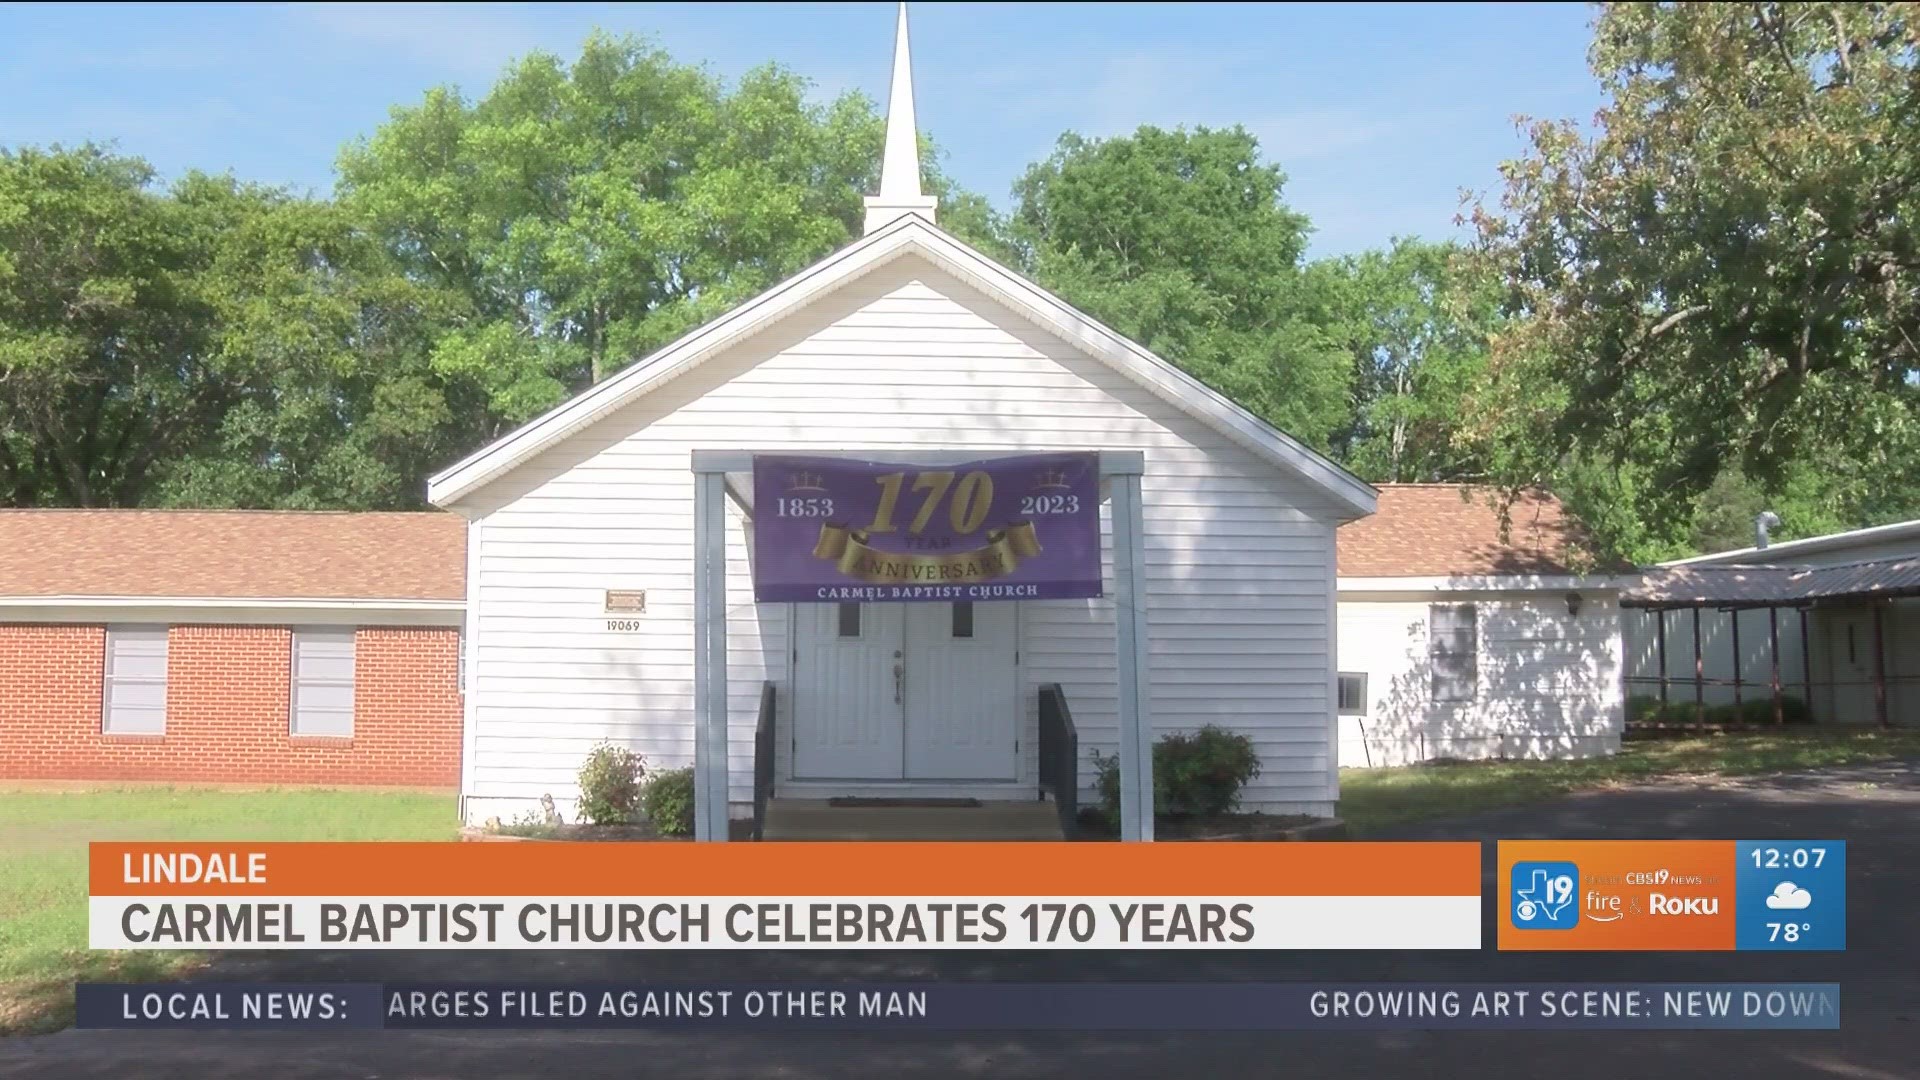 Carmel Baptist Church in Lindale celebrates 170th anniversary this Sunday